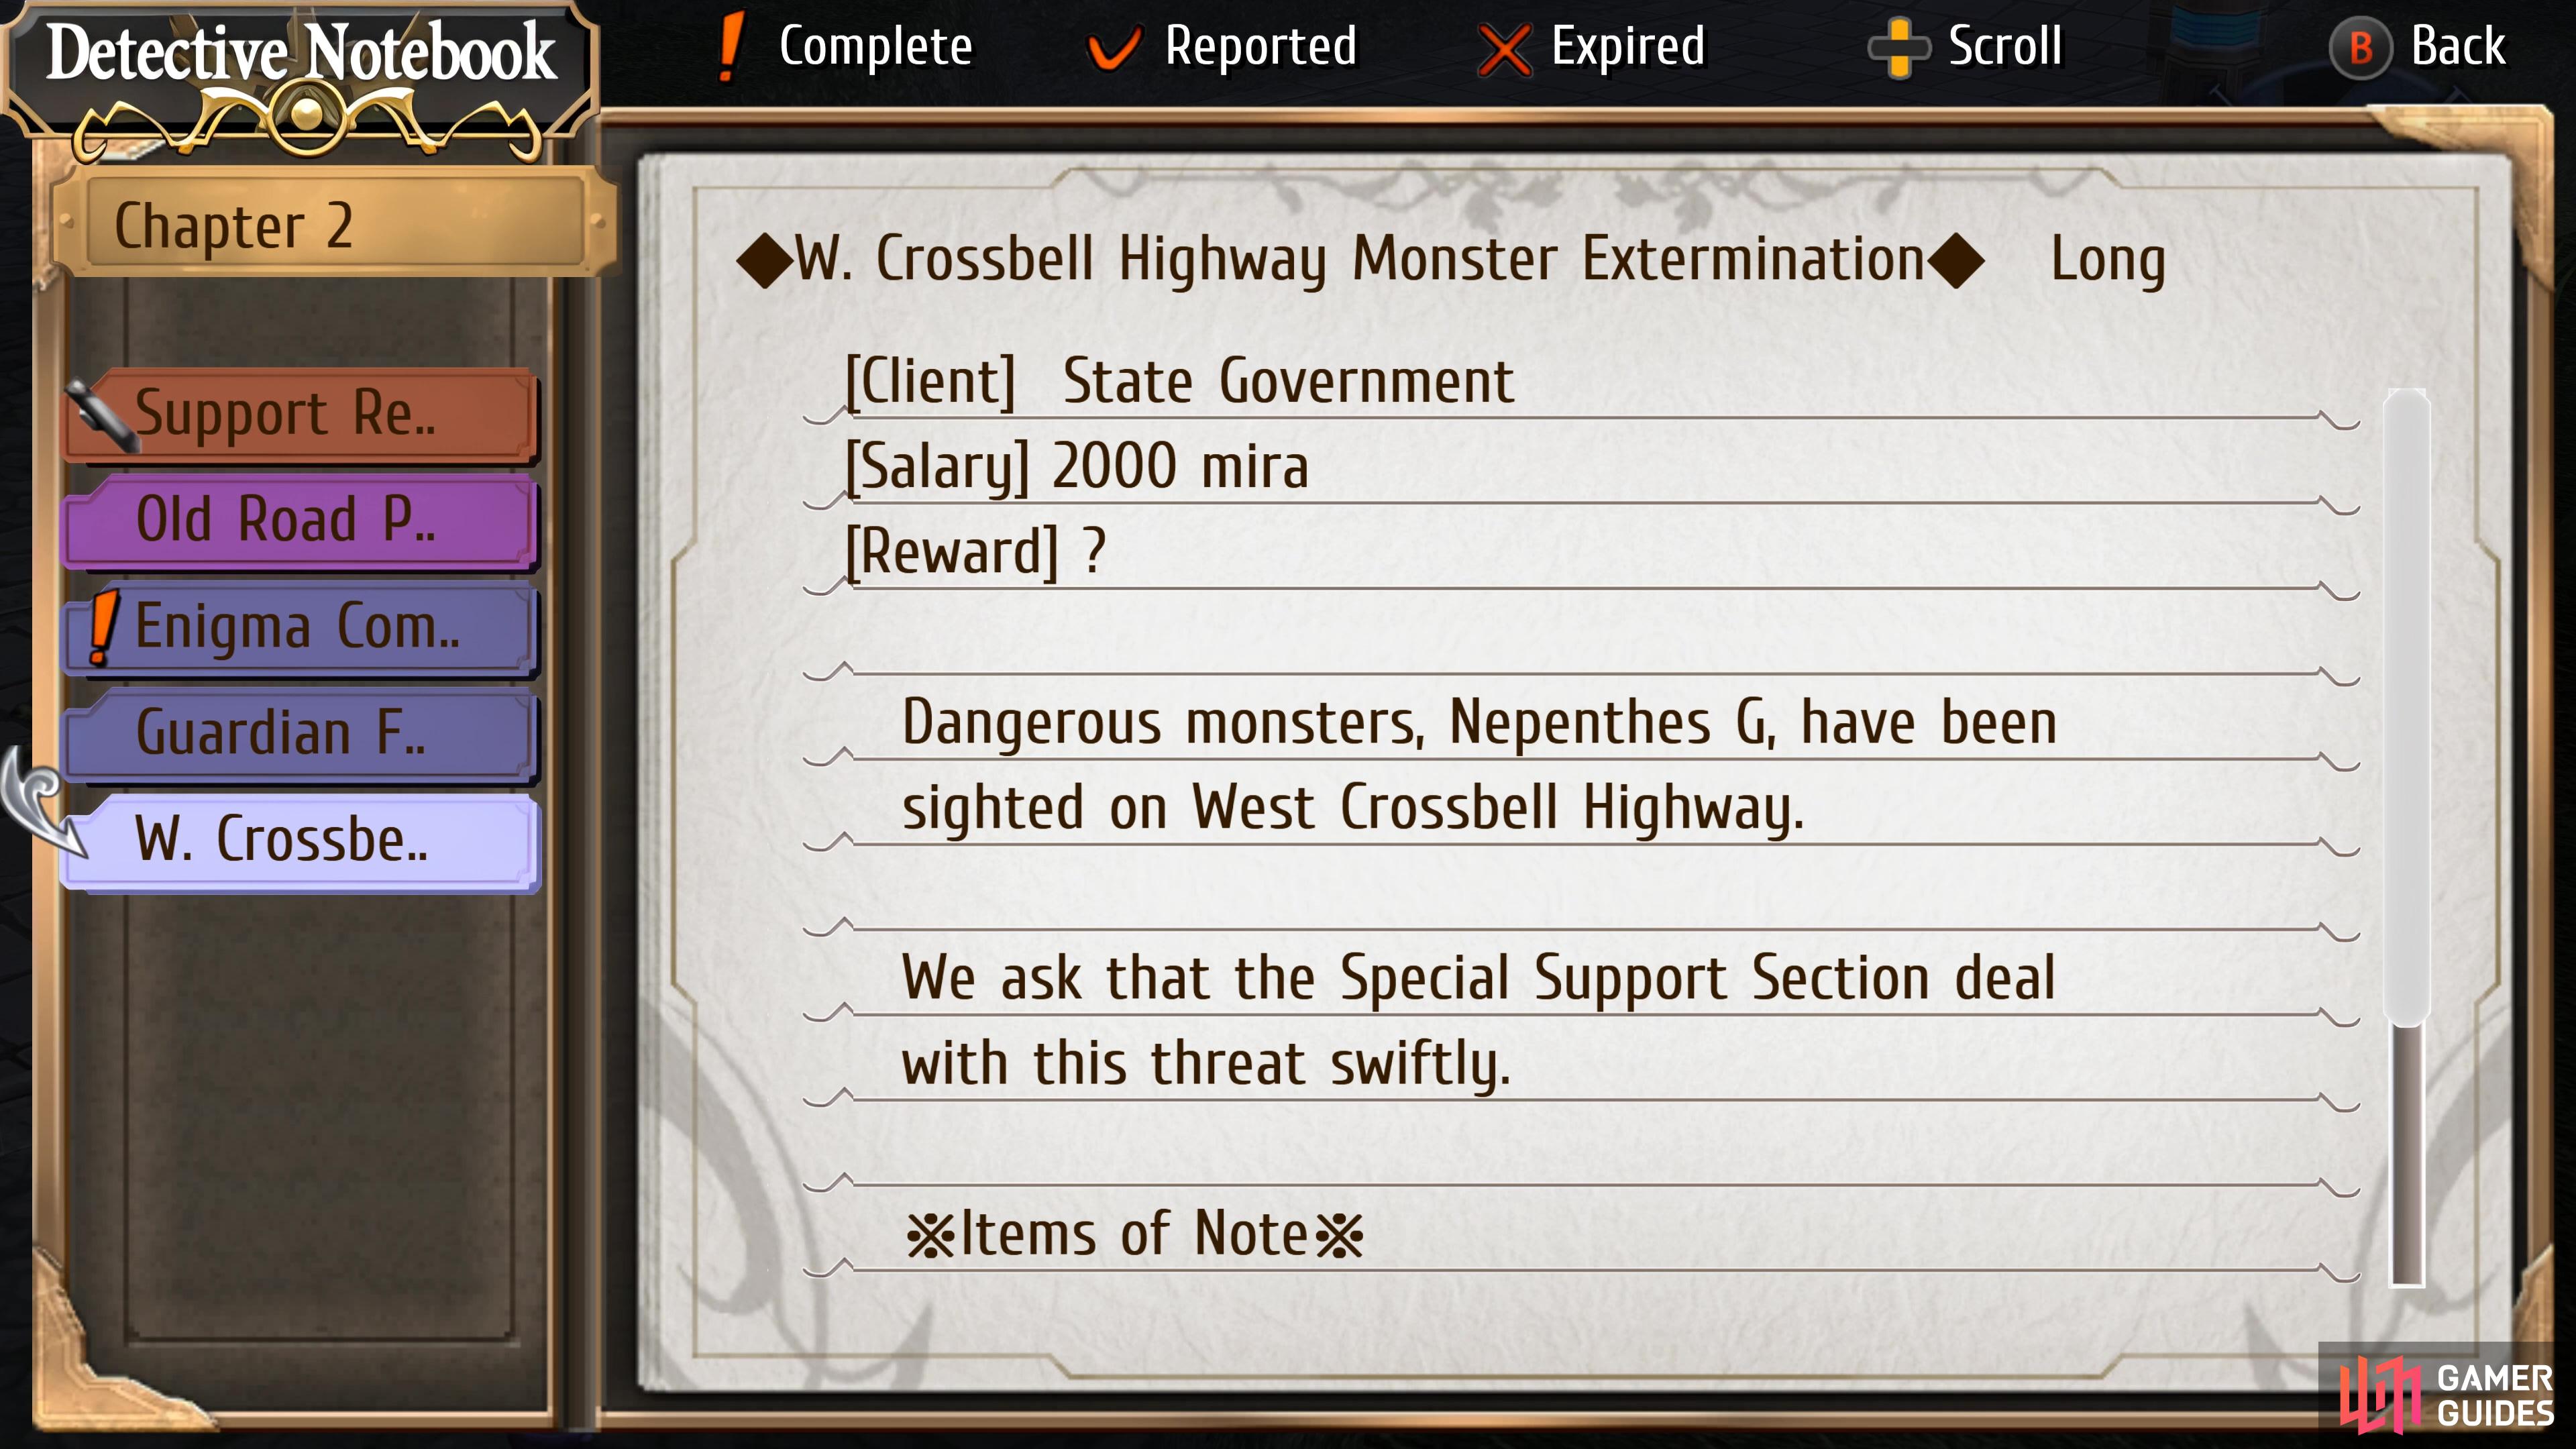 West Crossbell Highway Monster Extermination is a request on Chapter 2 Day 1.